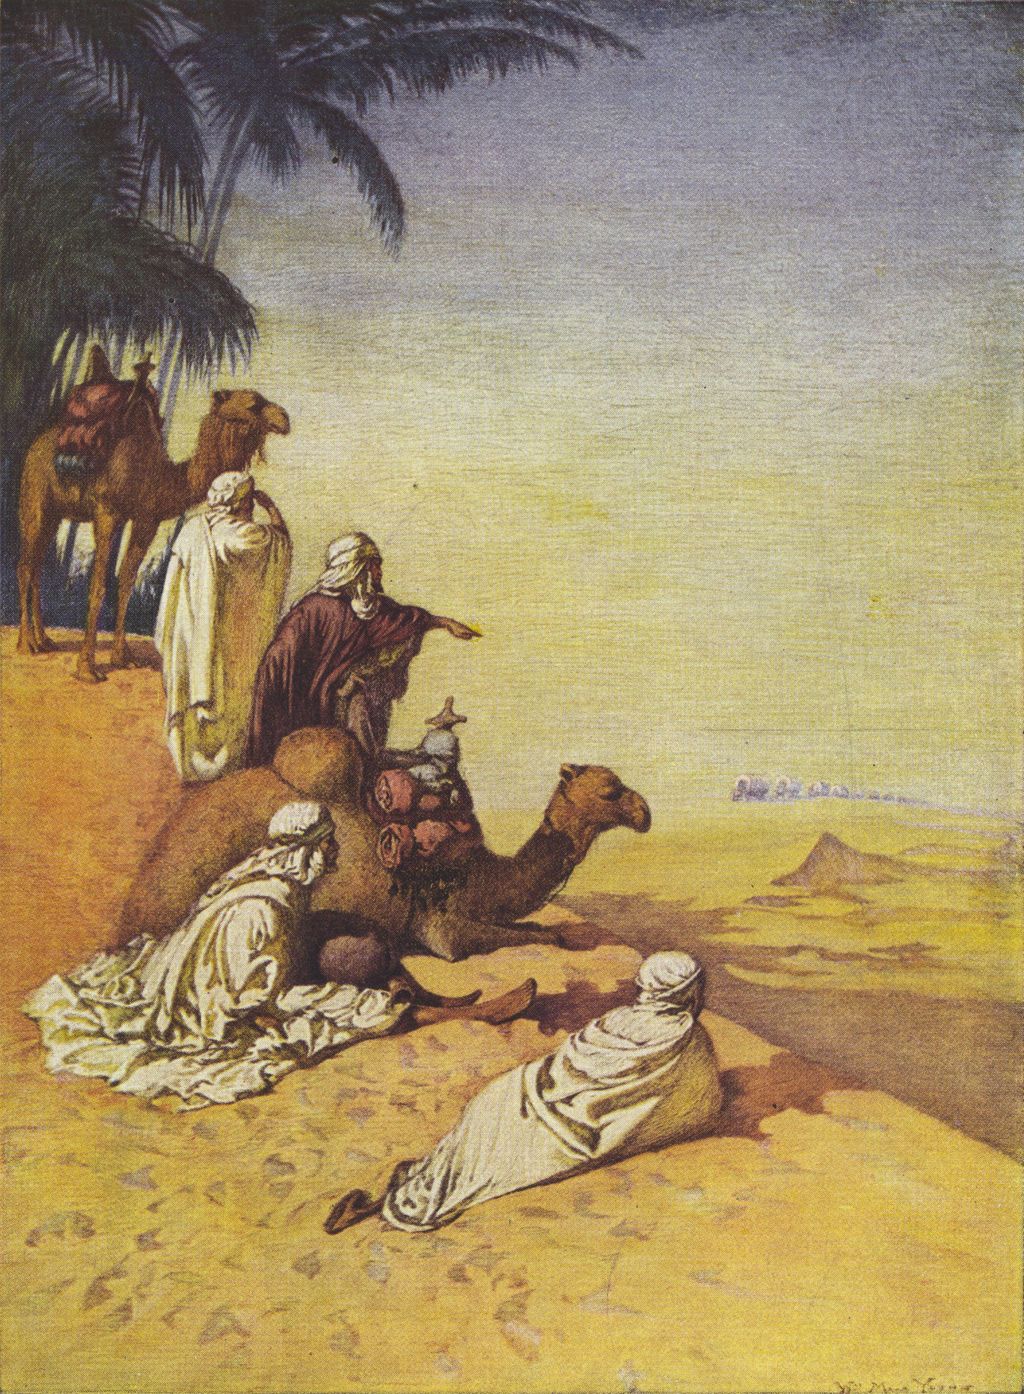 Miniature of Postcard of Bedouins in the desert, probably distributed at A Century of Progress to promote its Tunisian Village exhibit.